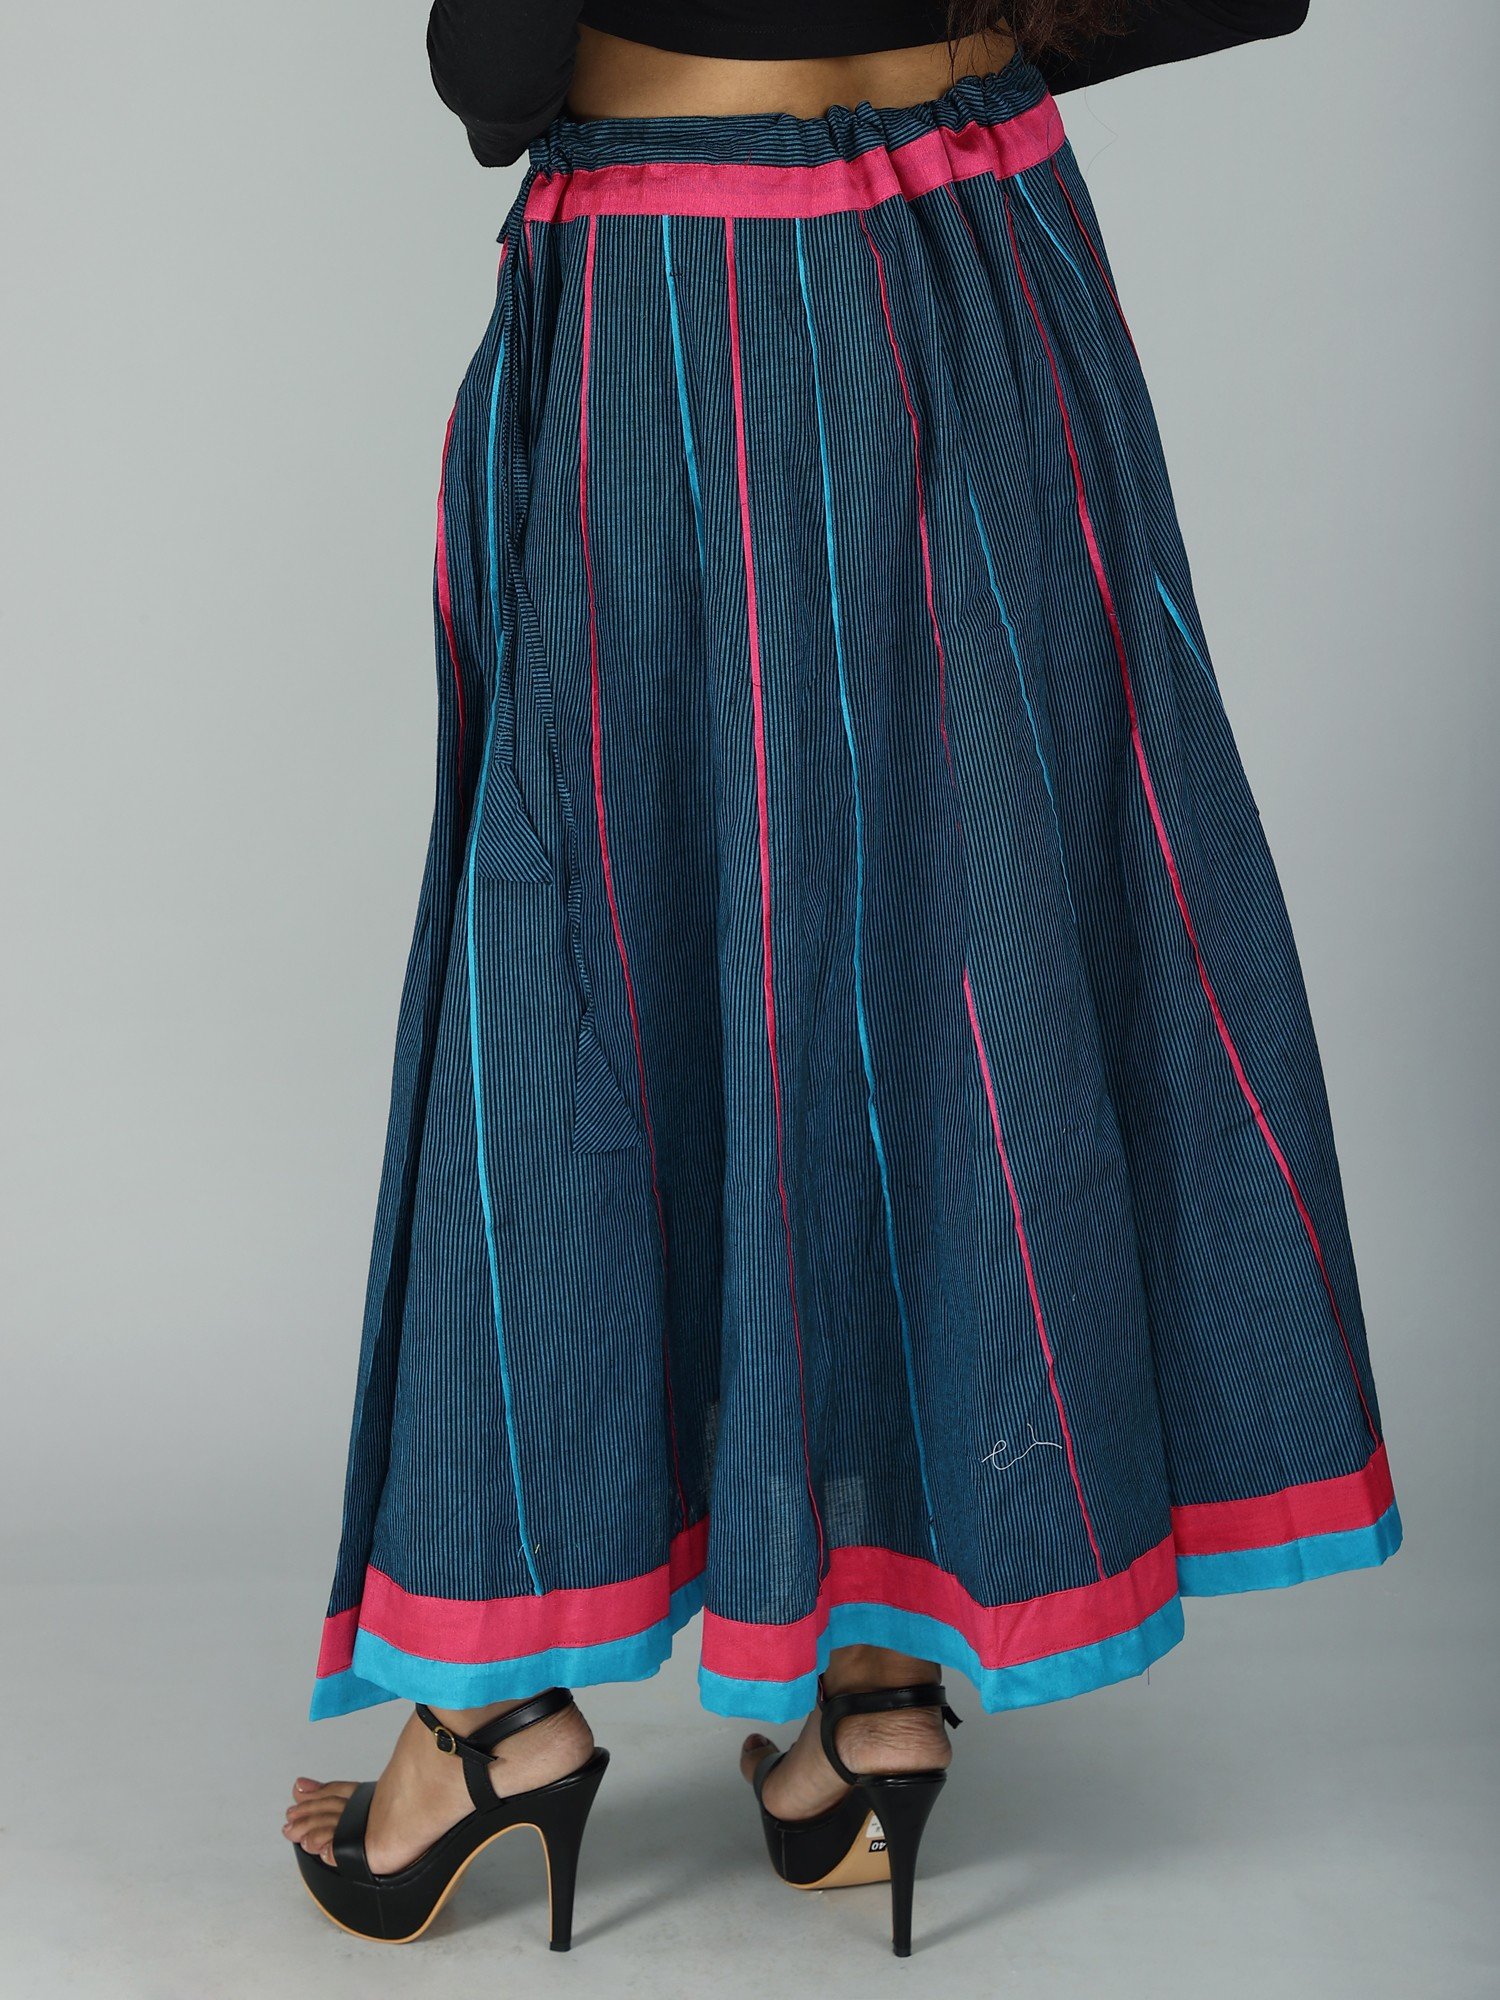 Long Skirt with Pinstripe Weave and Contrast Patch Border from ISKCON ...